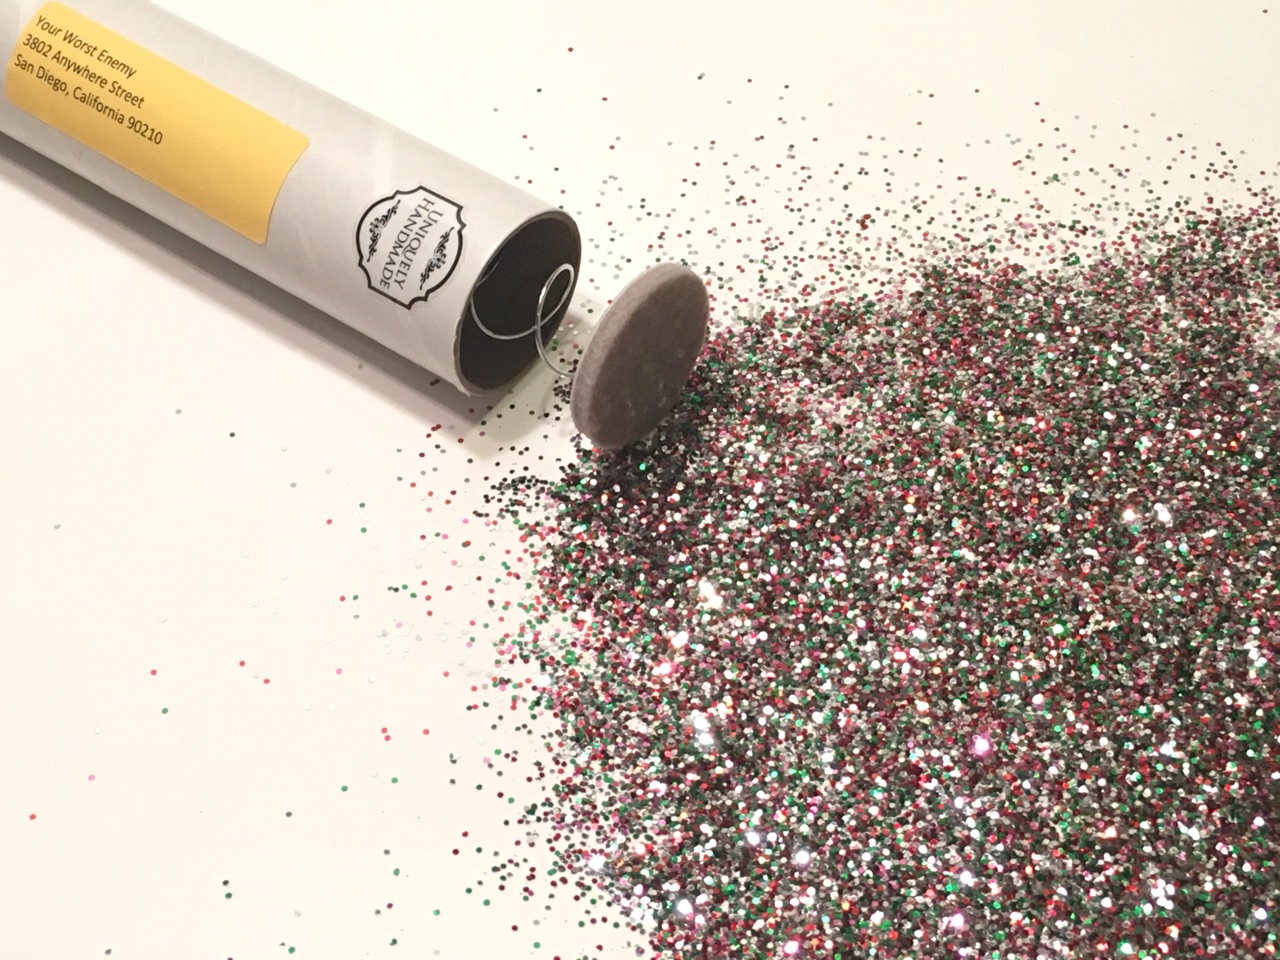 Spring Loaded Glitter Bomb, Glitter Bombs & Anonymous Prank Mail